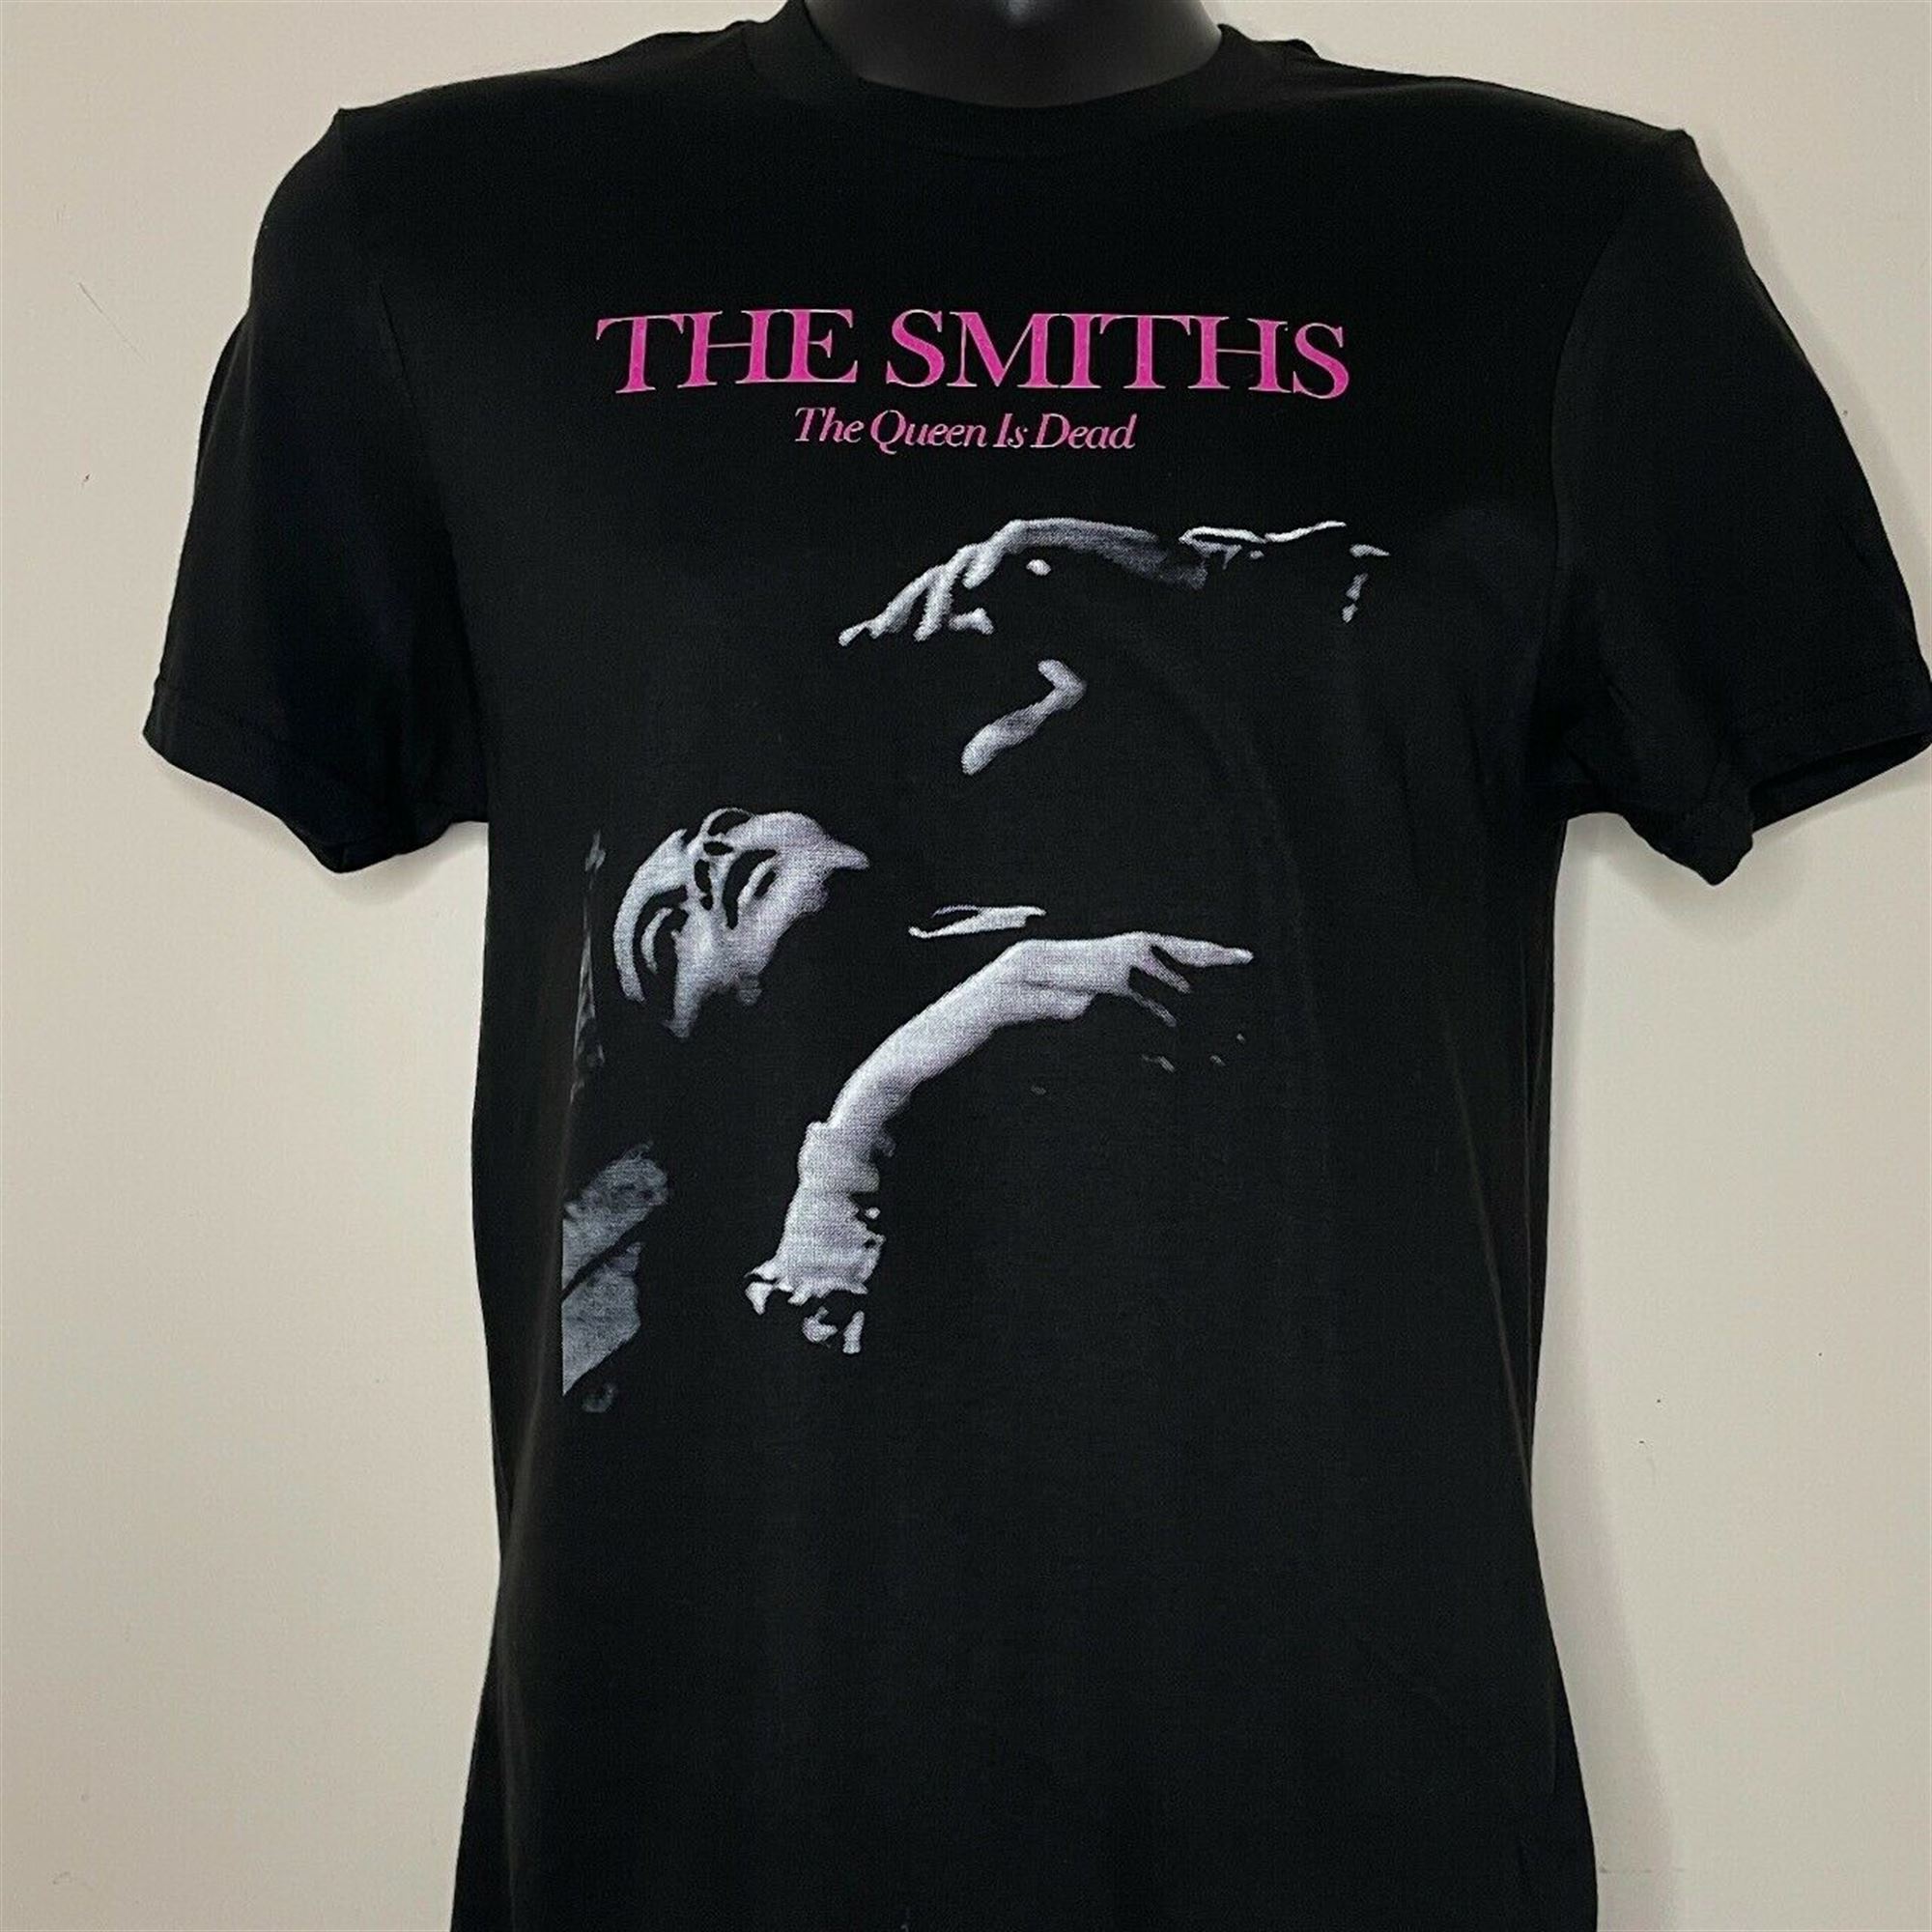 The Smiths Shirt The Queen Is Dead Shirt The Smiths Unisex Vintage T-shirt